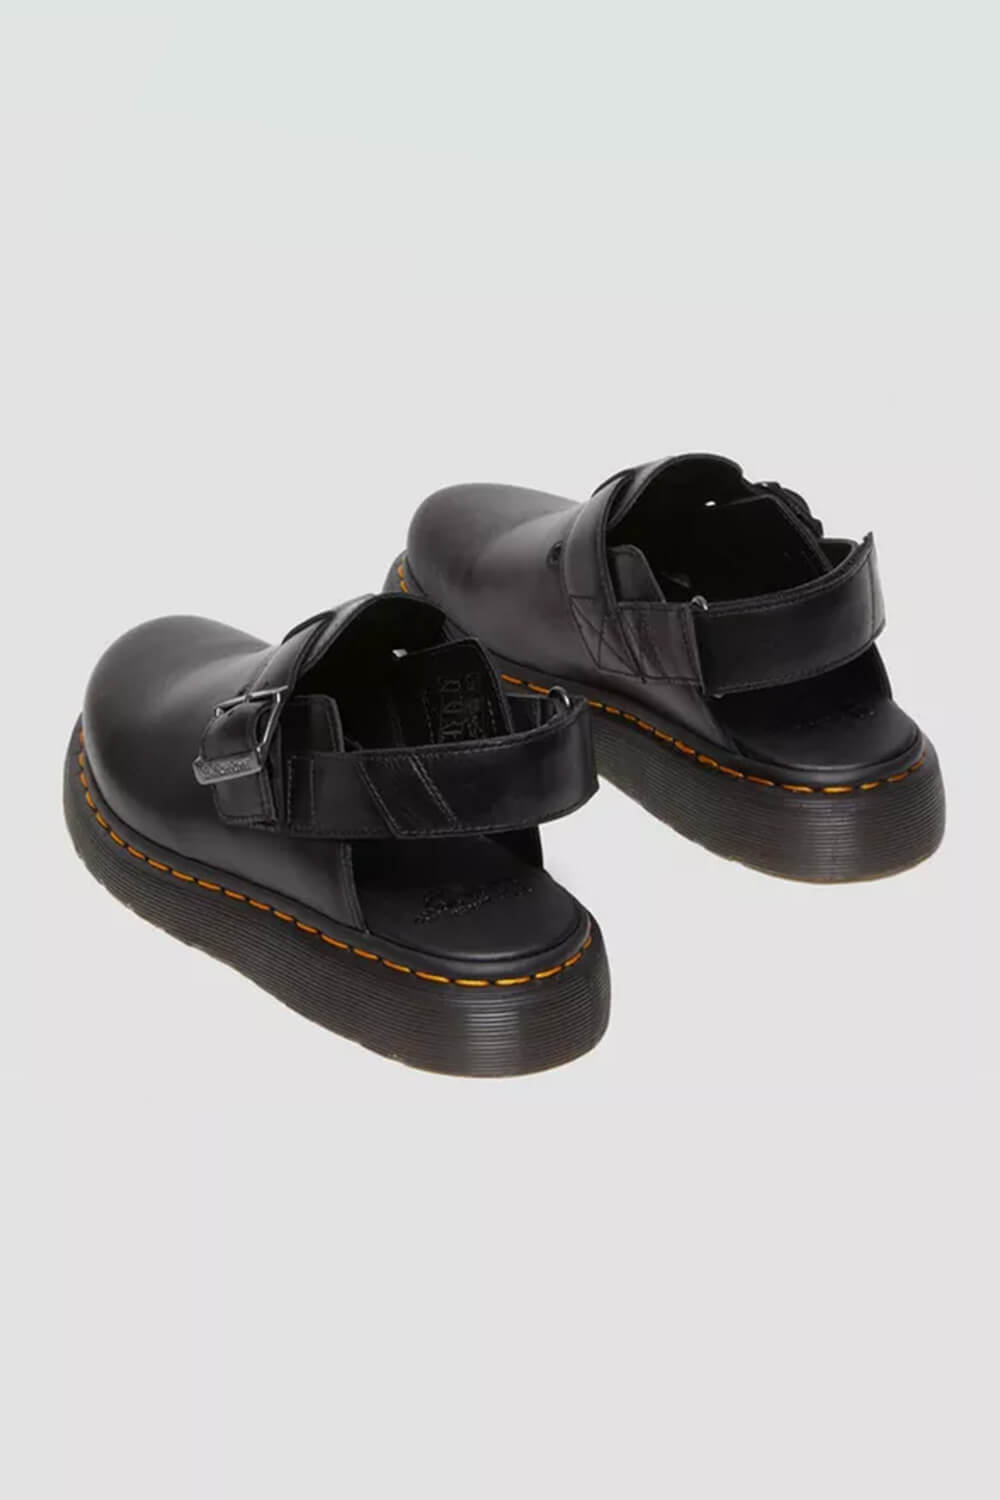 Dr. Martens Jorge II Brando Leather Slingback Mules for Women in